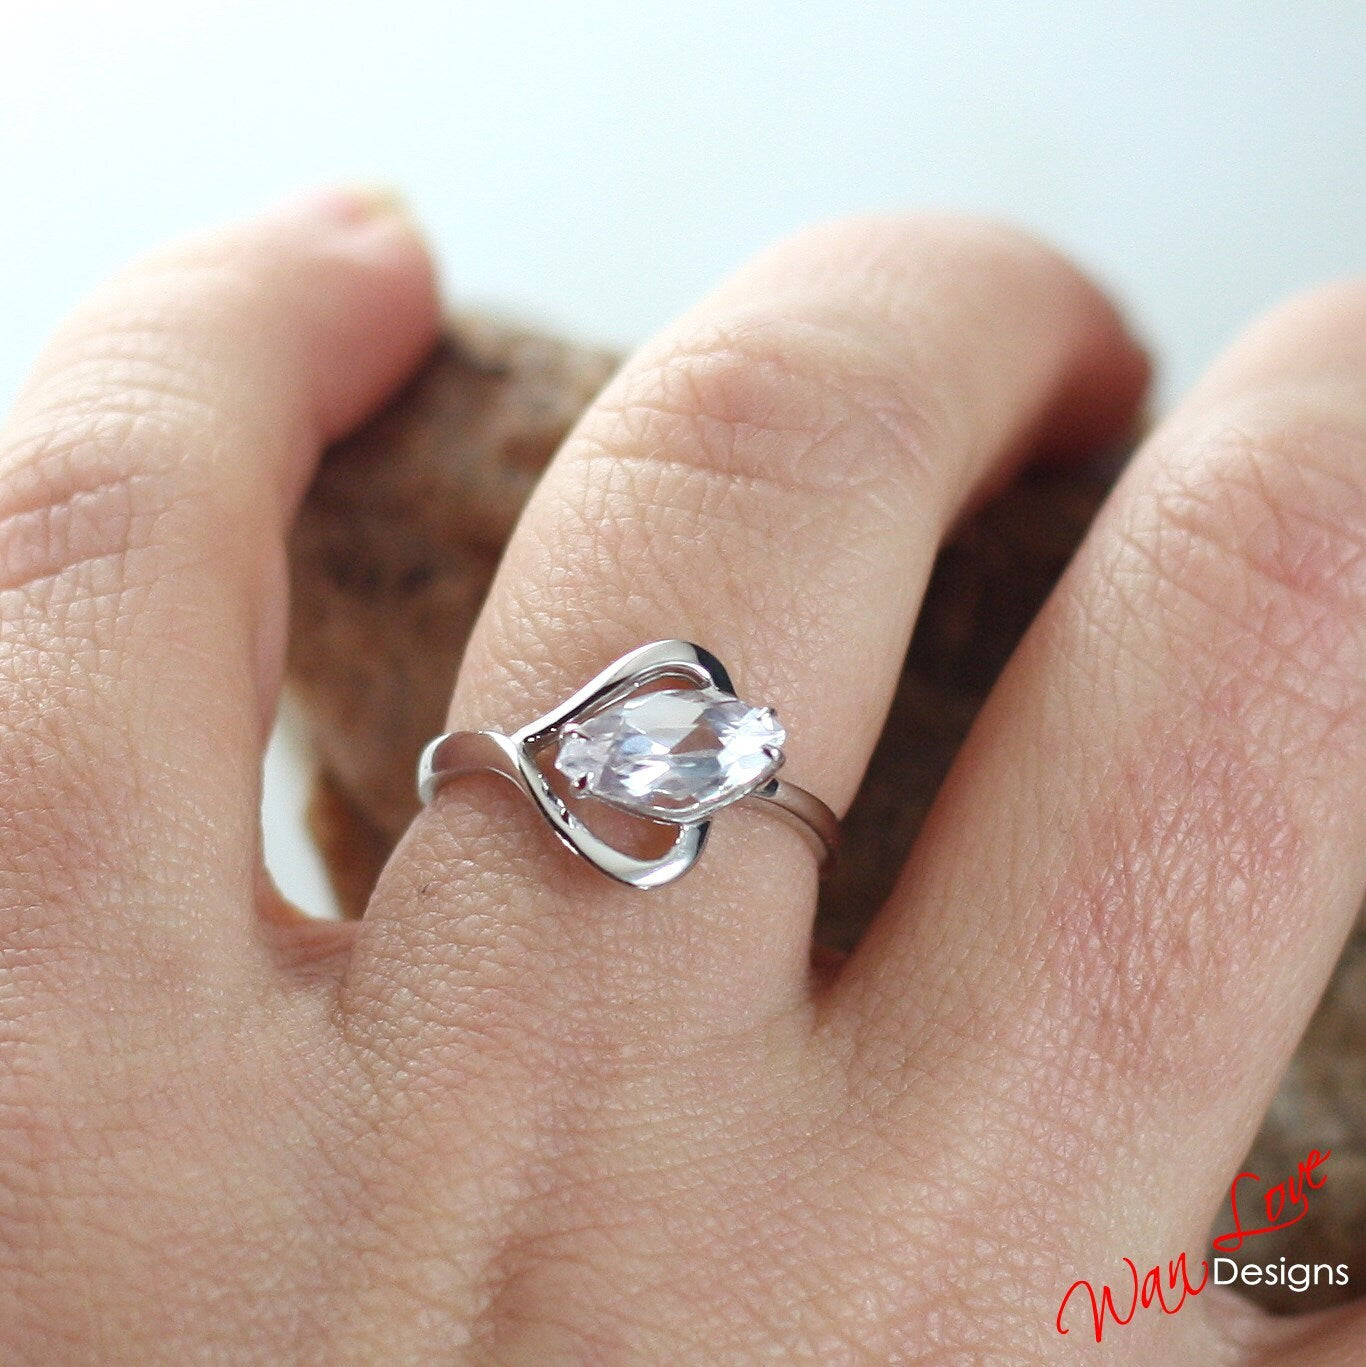 Sample Sale Ready to ship-White Sapphire Marquise Open heart Solitaire Engagement Ring-1.25ct-10x5mm-Silver Rhodium-Wedding-Anniversary Gift Wan Love Designs